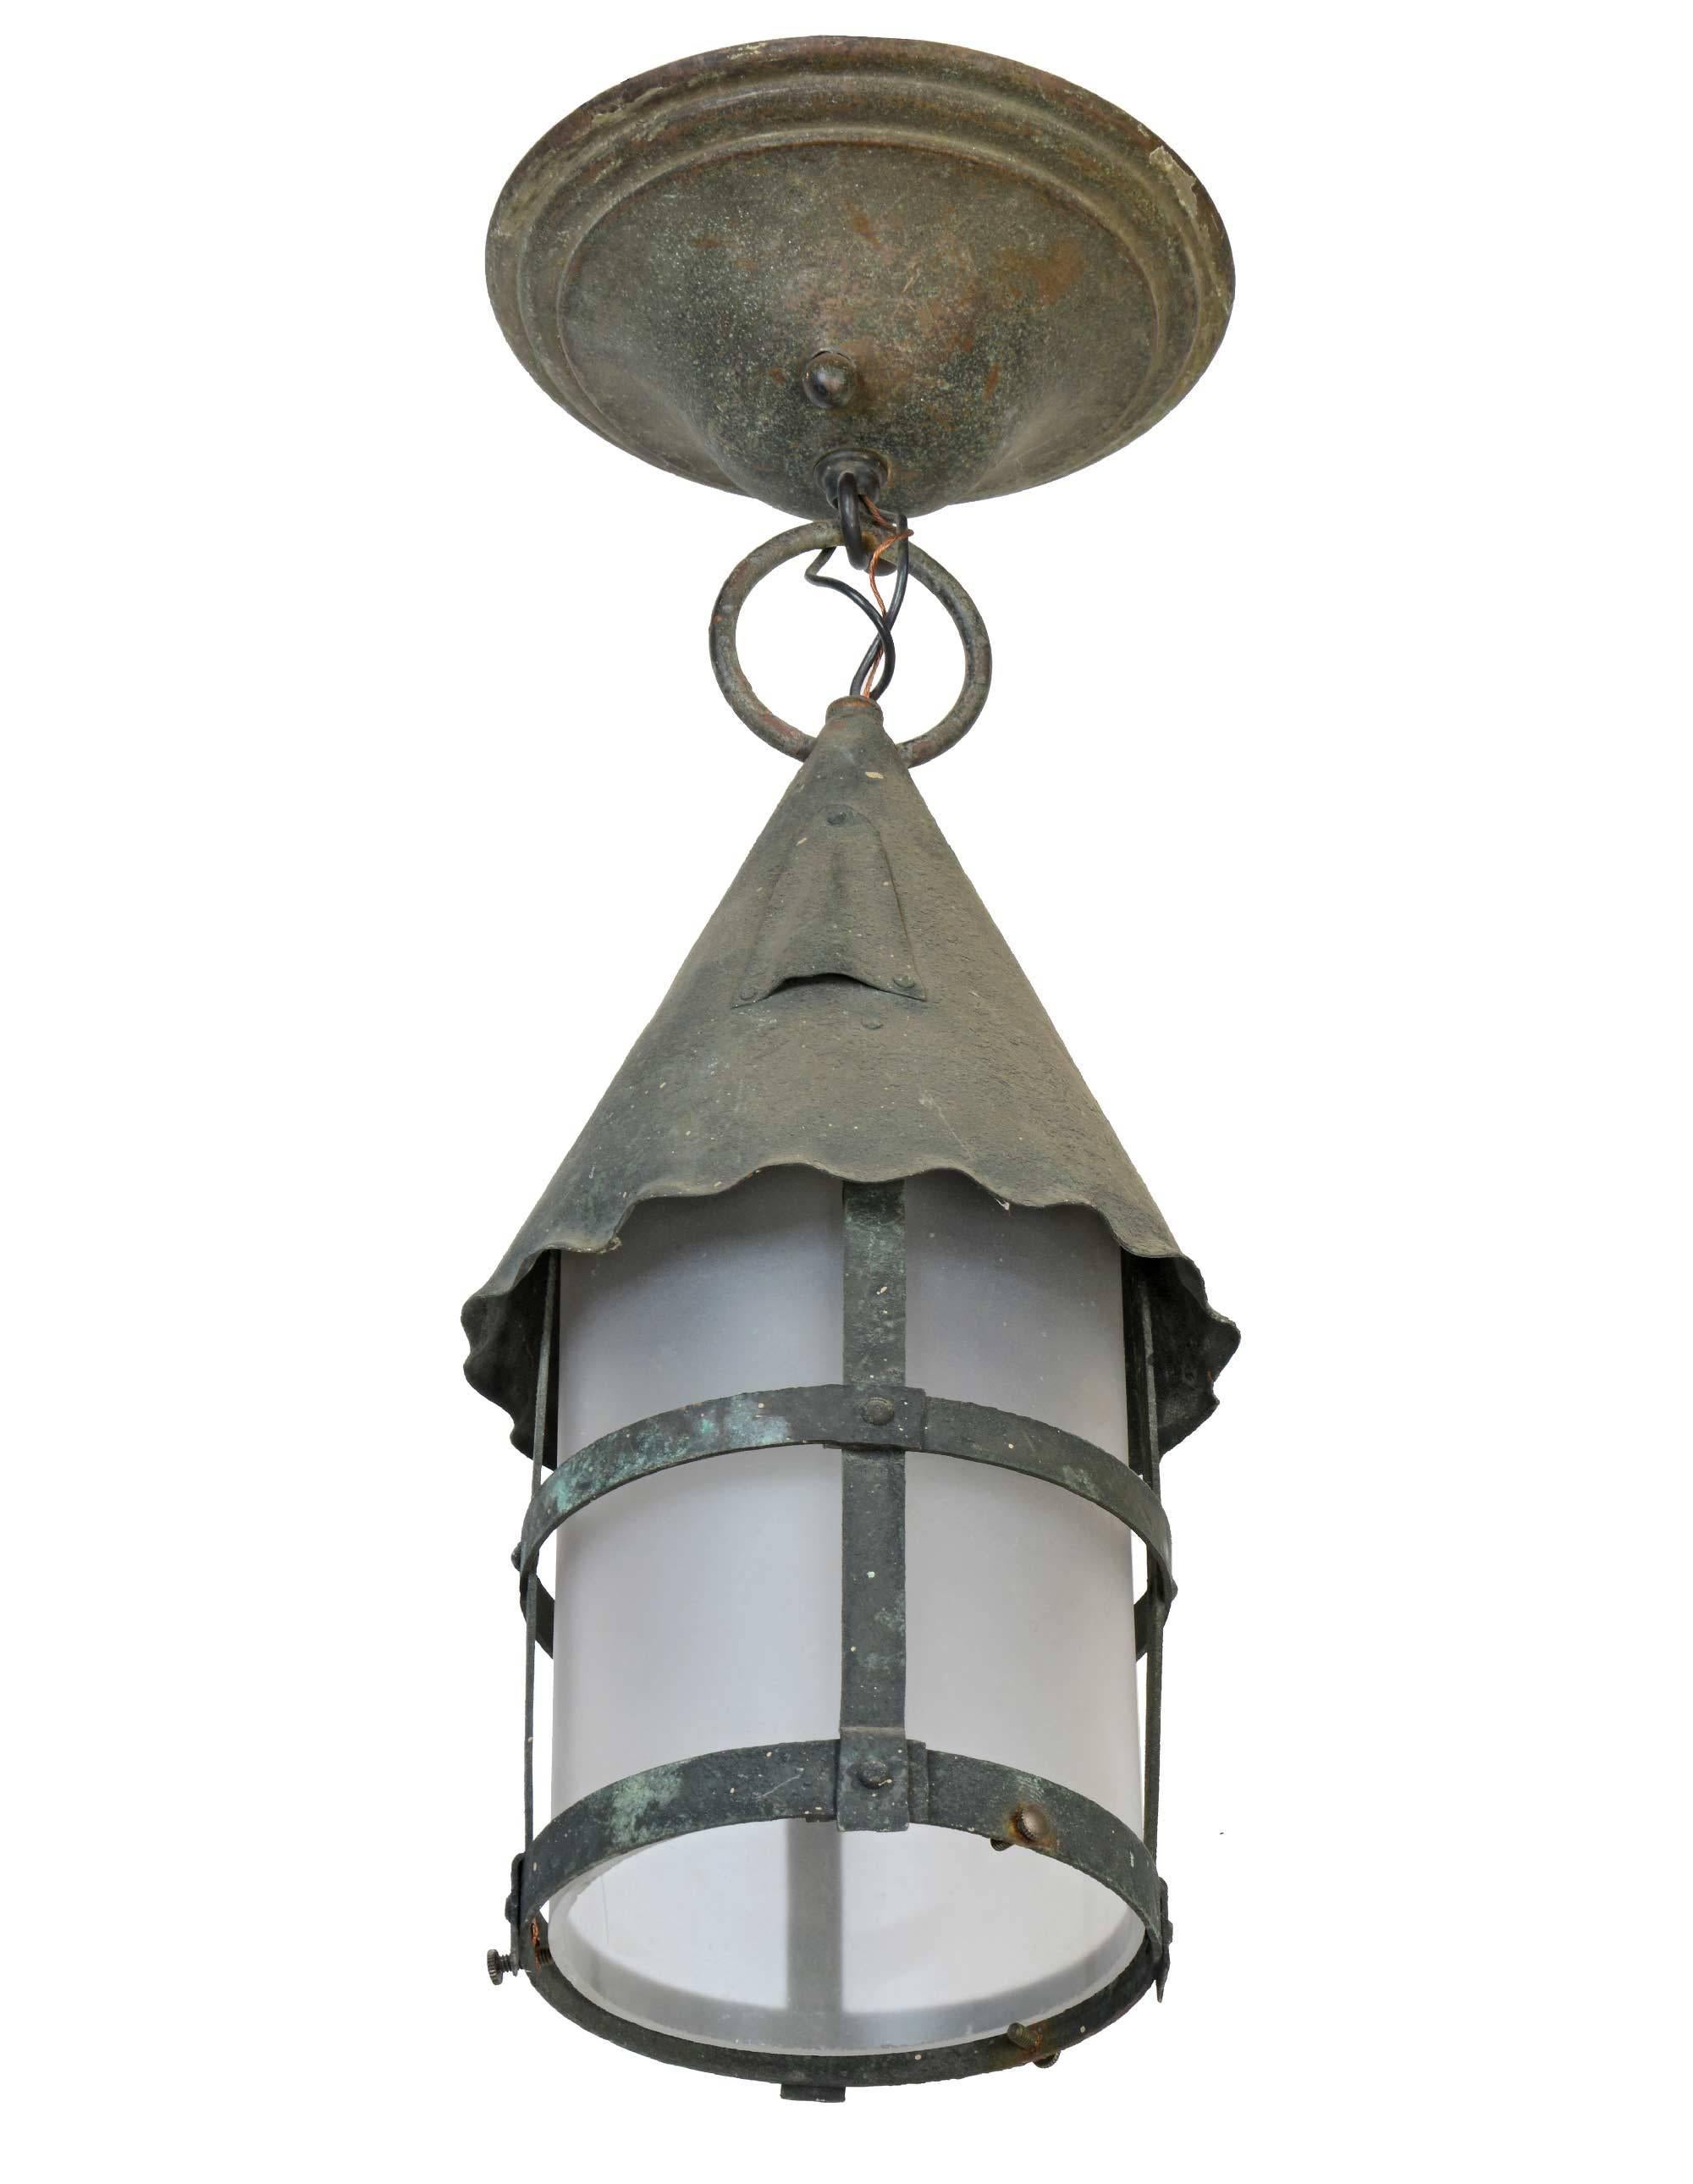 This exterior copper lantern features Arts and Crafts details and has a white glass tube insert.

Finish: Original patina.
Single medium socket.
Measures: 17